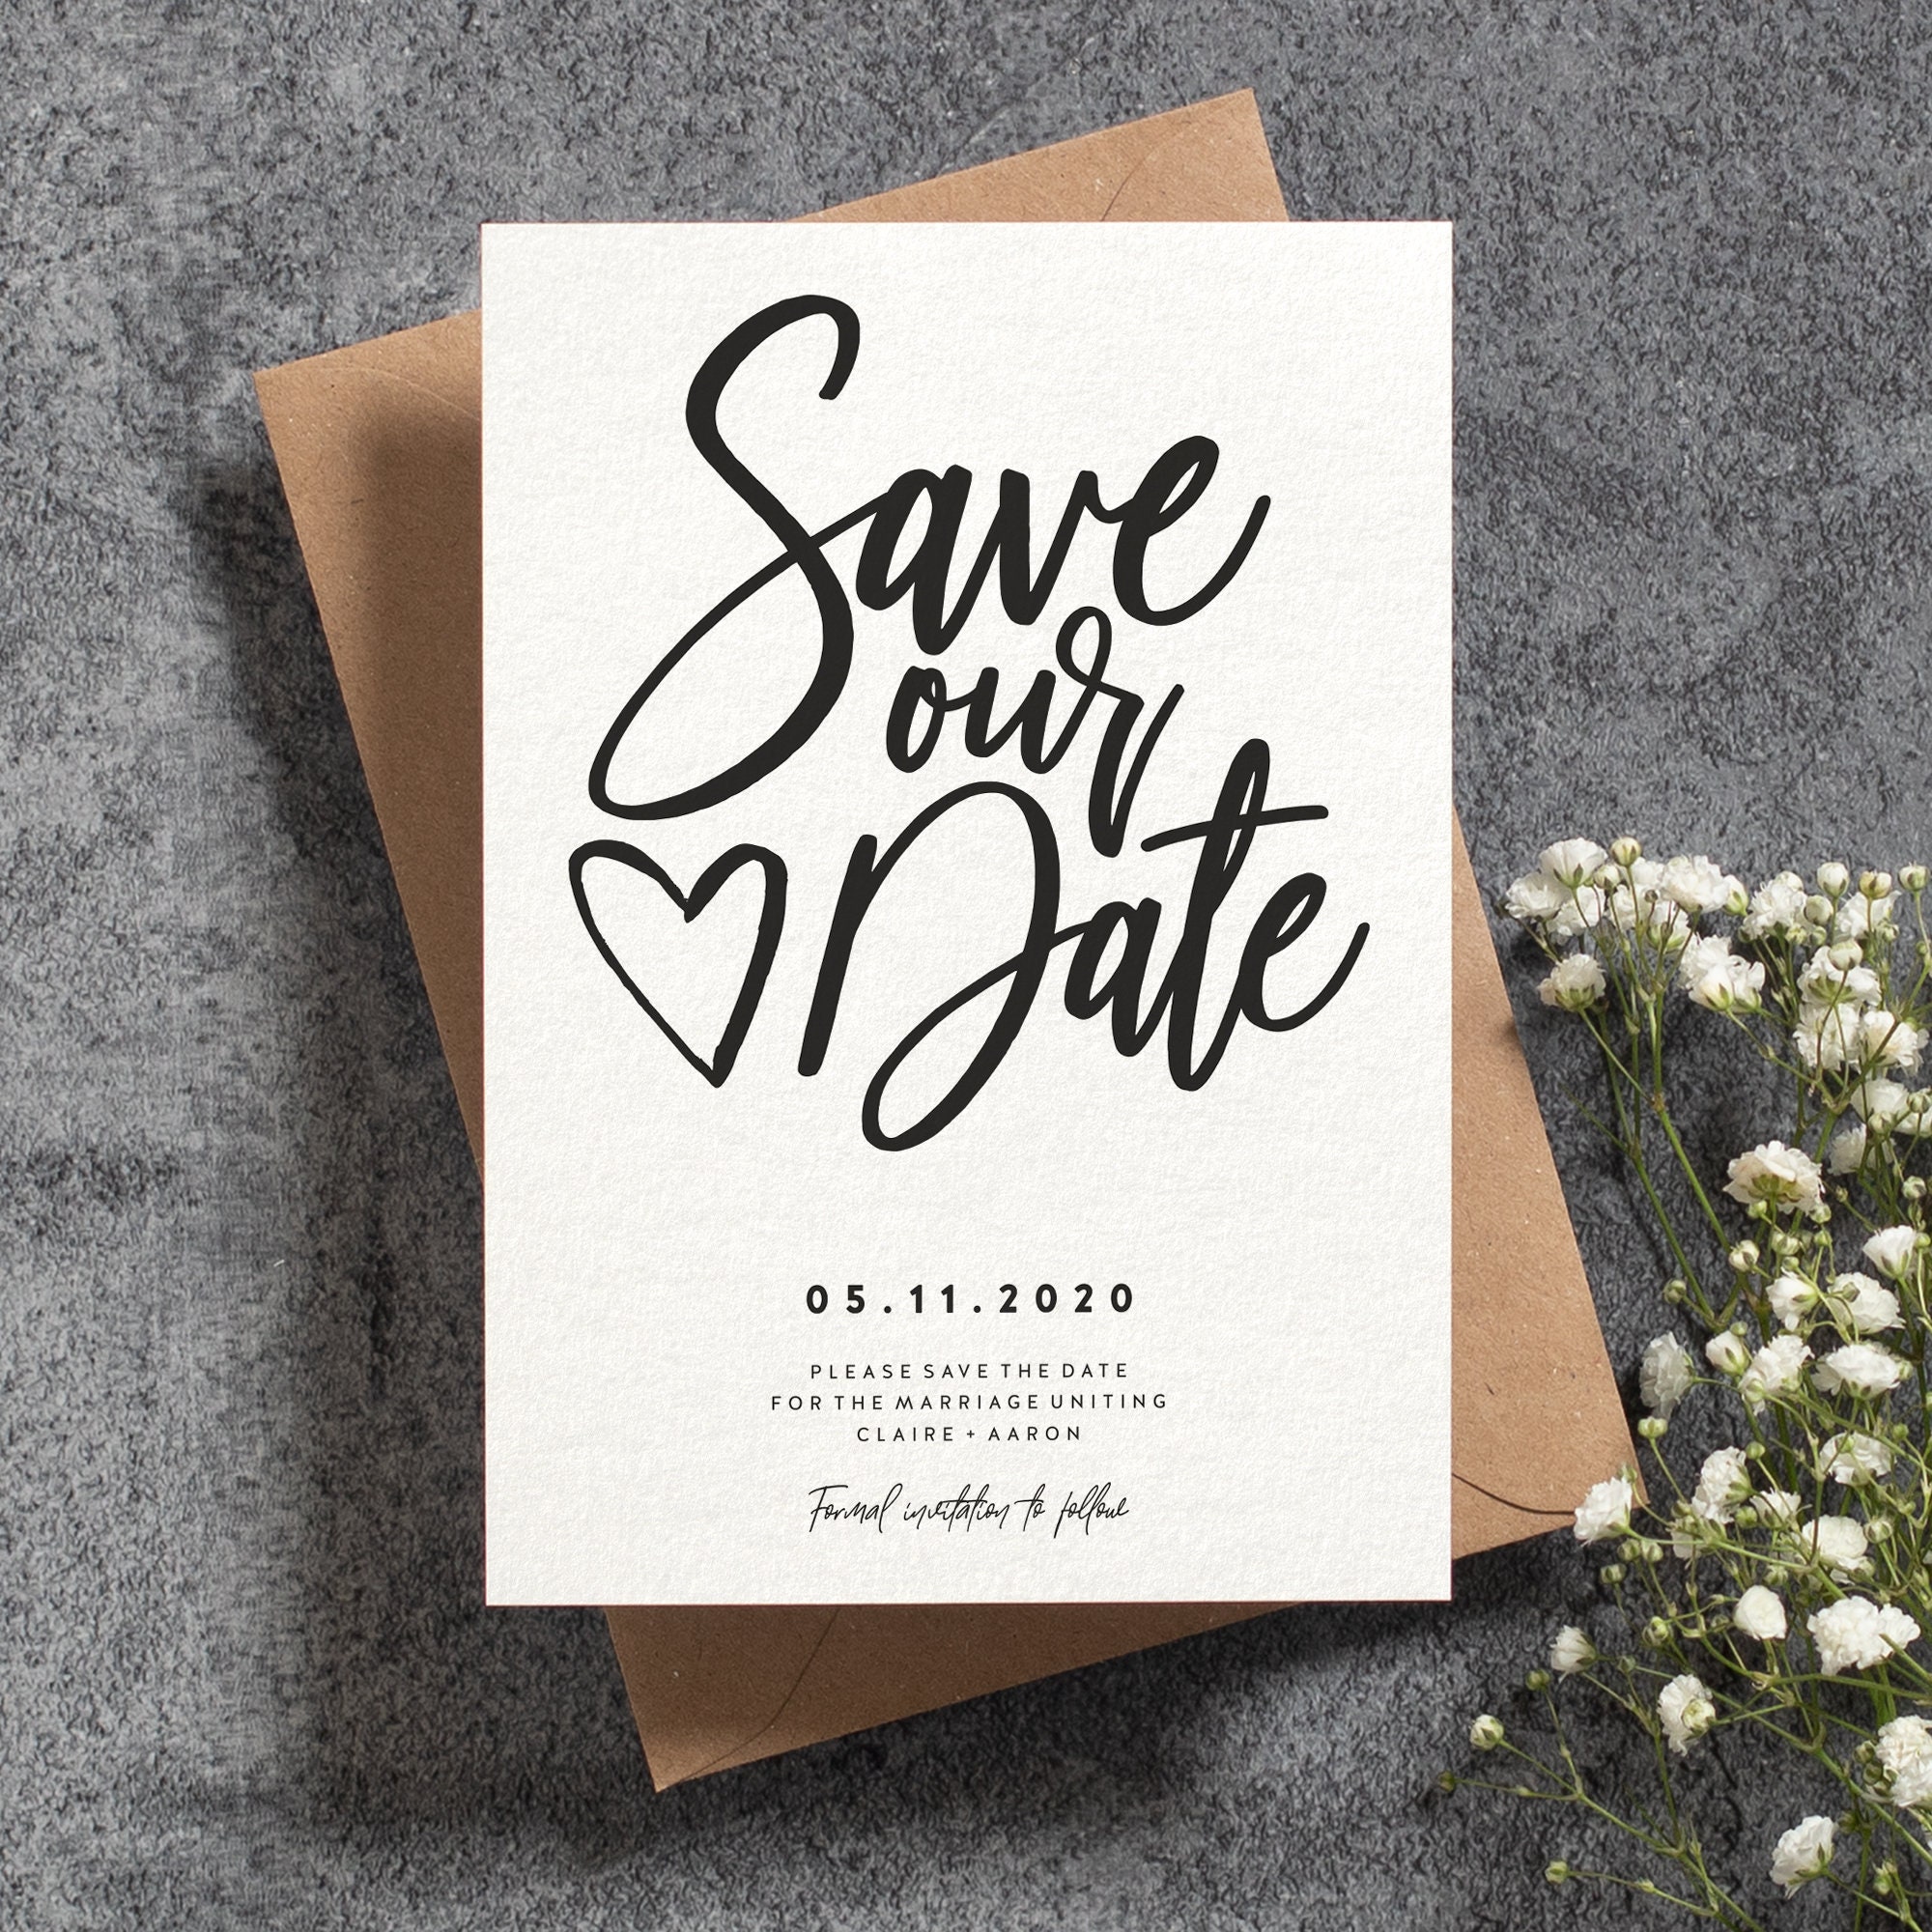 Floral Save the Date, Rustic Save the Date Cards for Weddings, Elegant Save  the Date Wedding, Your choice of Quantity and Envelope Color